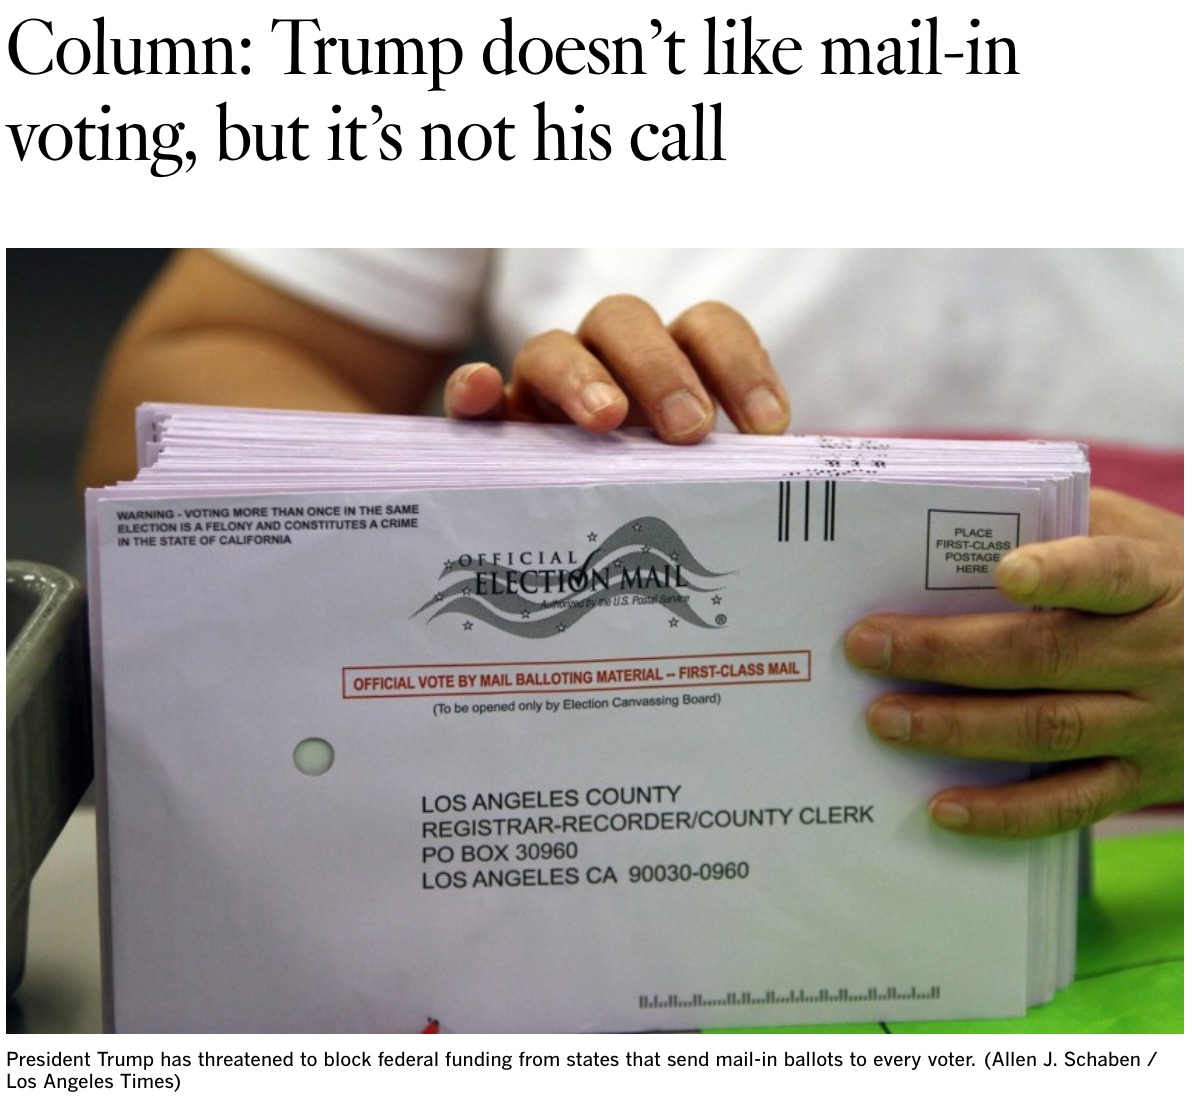 36/GOP leaders have long urged their supporters to vote by mail. GOP governors are sounding the call for easy access to mail-in ballots ( @DoyleMcManus for  @LATimes):  https://www.latimes.com/politics/story/2020-05-24/column-trump-doesnt-like-mail-in-voting-but-its-not-his-call